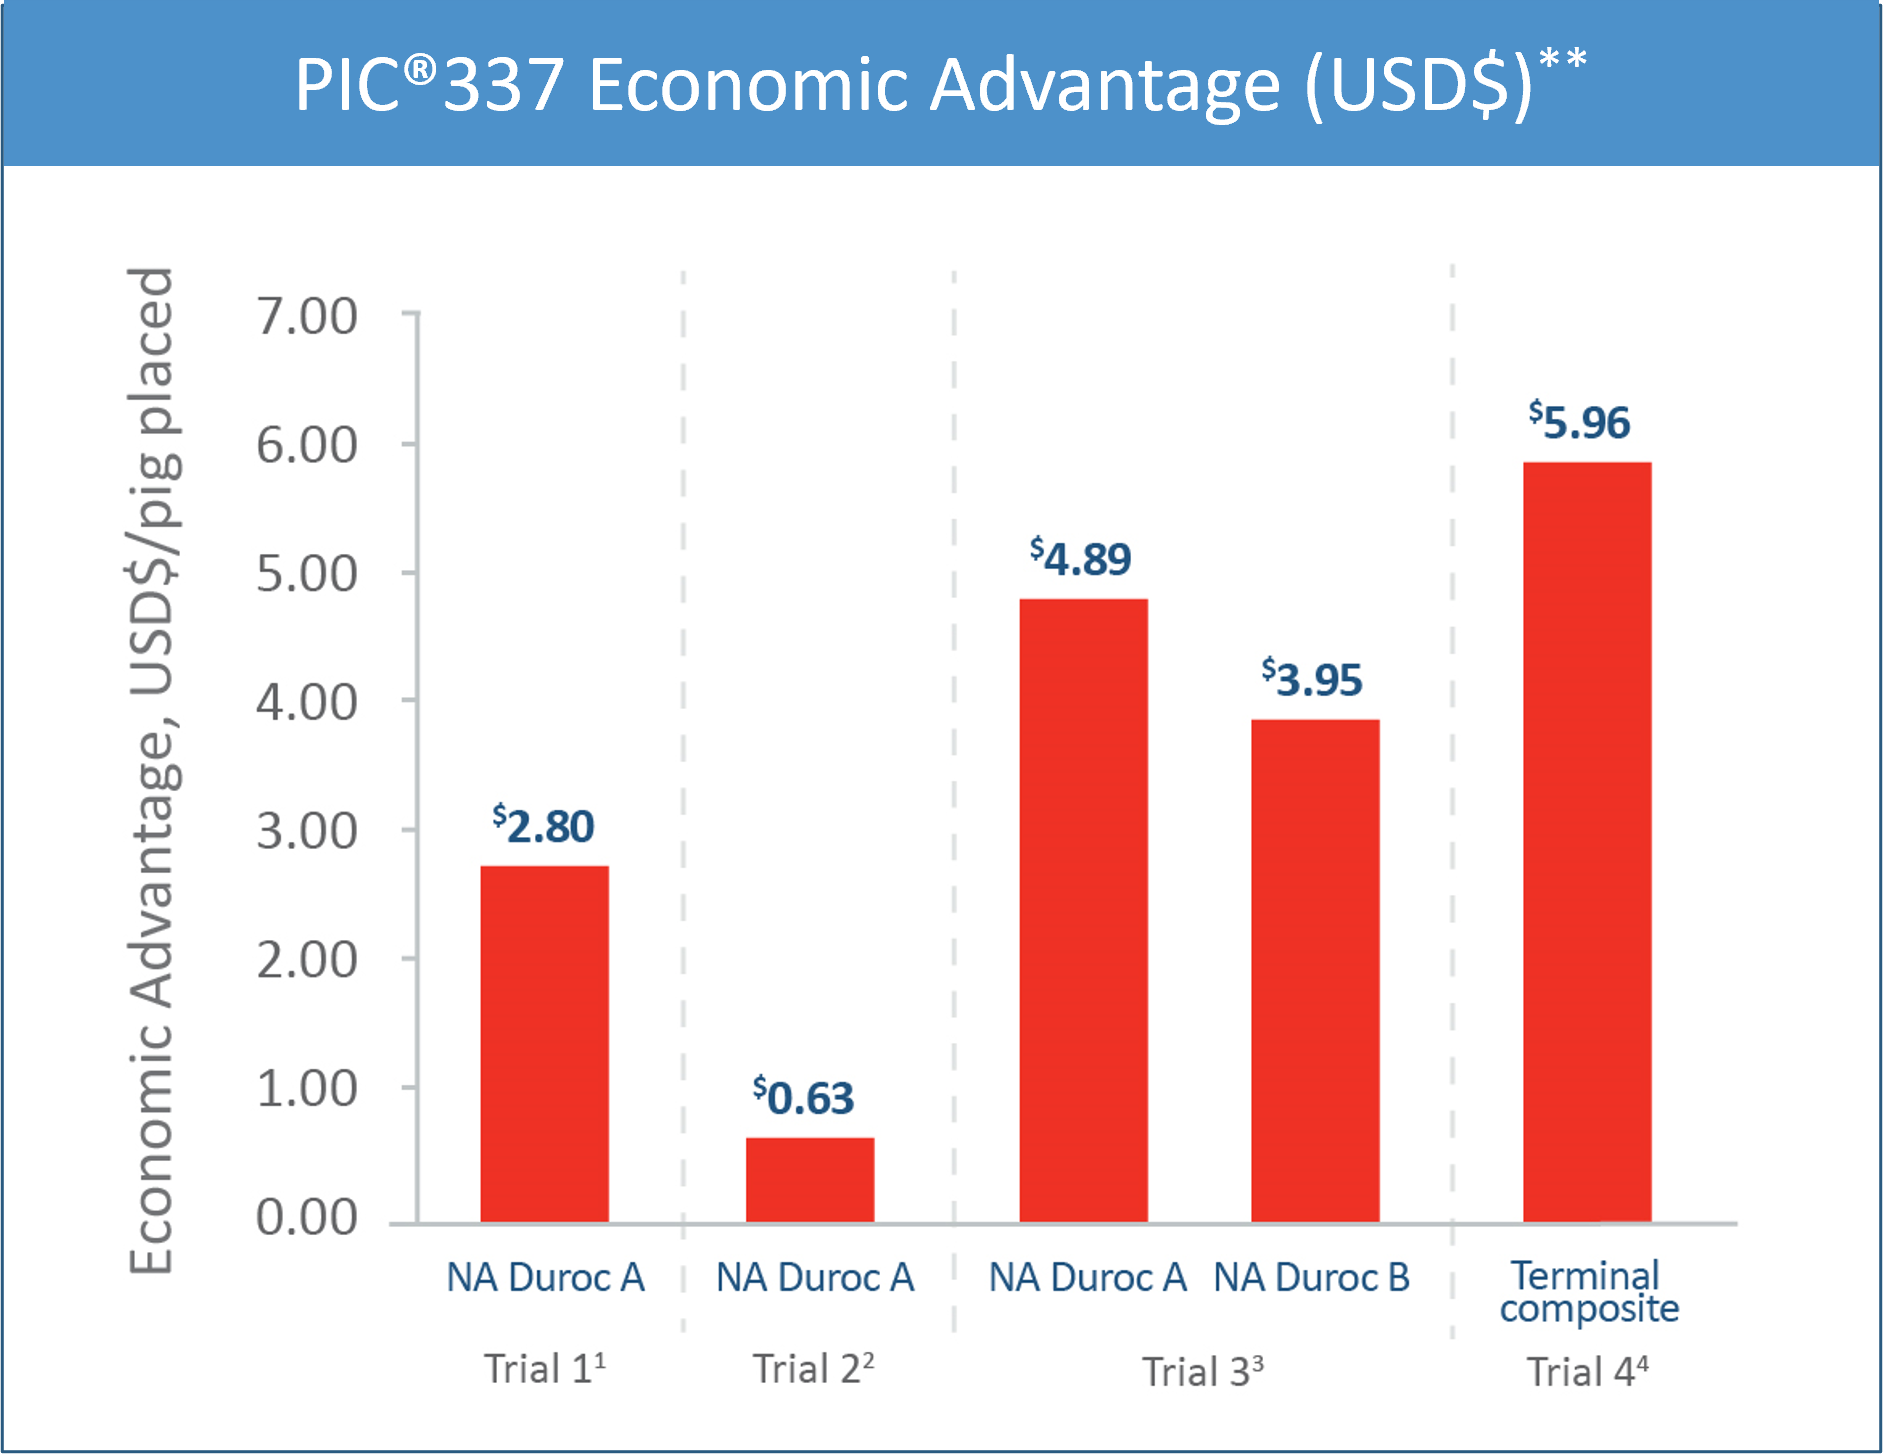 This graph shows that PIC®337 offspring consistently deliver economic advantages of up to $5.96 over competitor progeny.